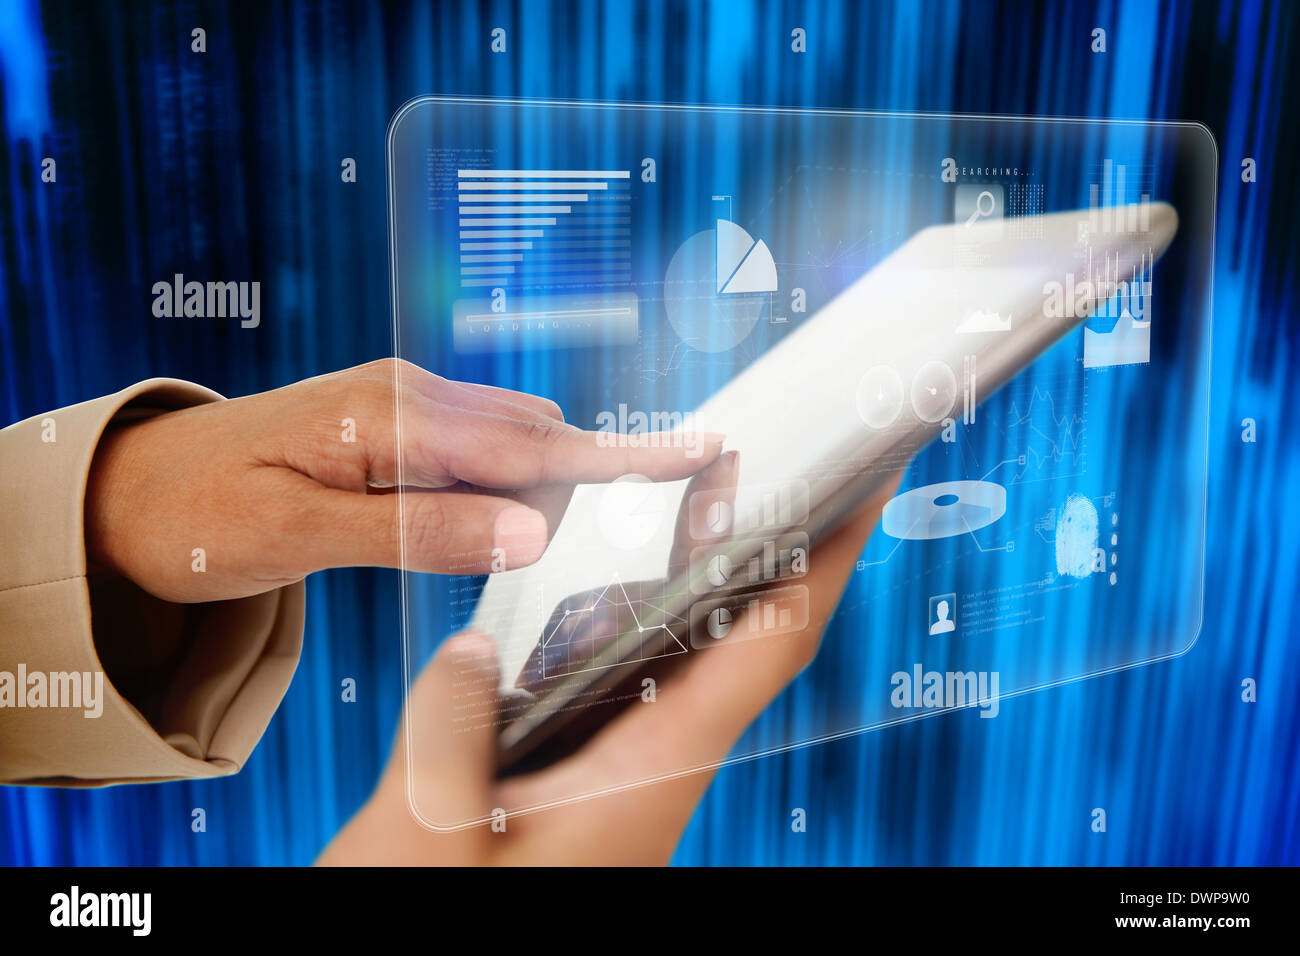 Businesswoman touching tablet with interface Stock Photo